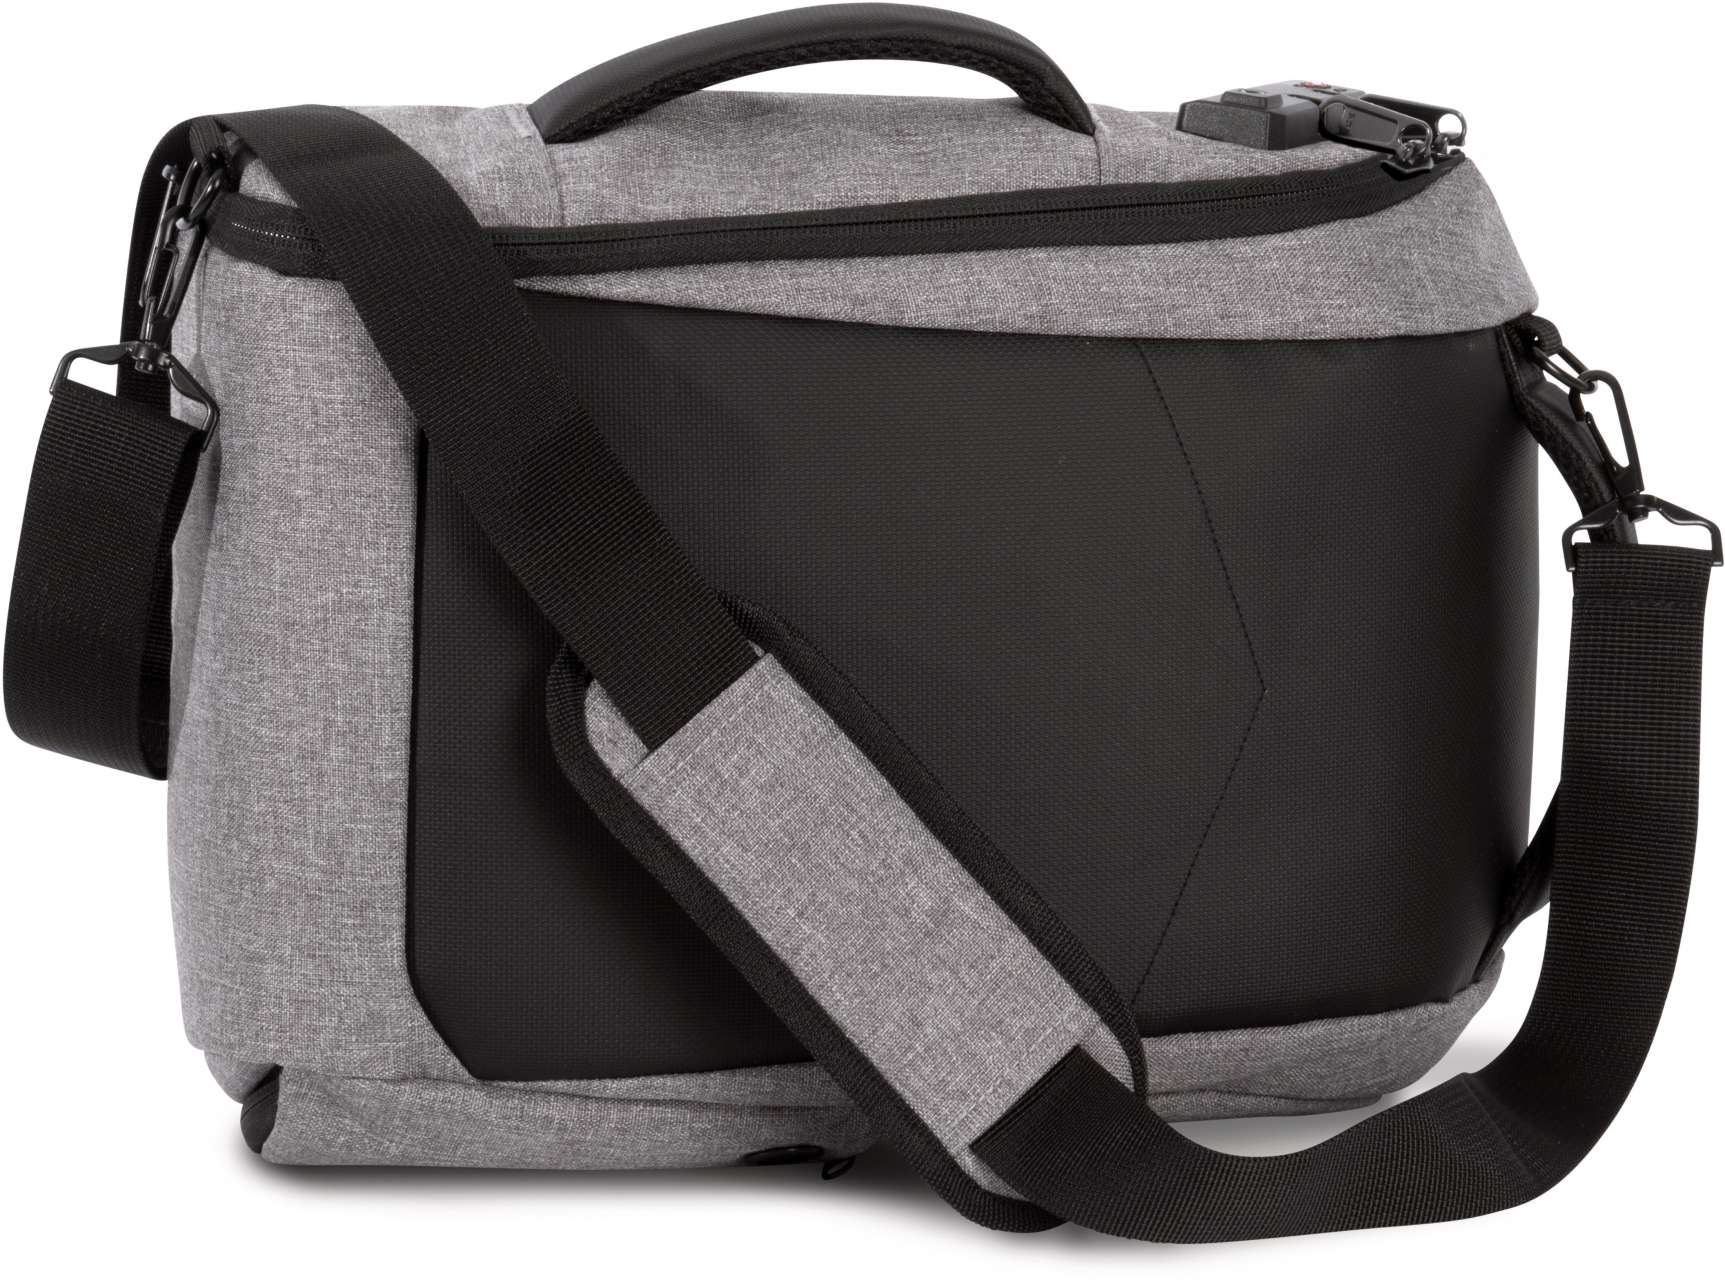 ANTI-THEFT BACKPACK FOR 13” TABLET